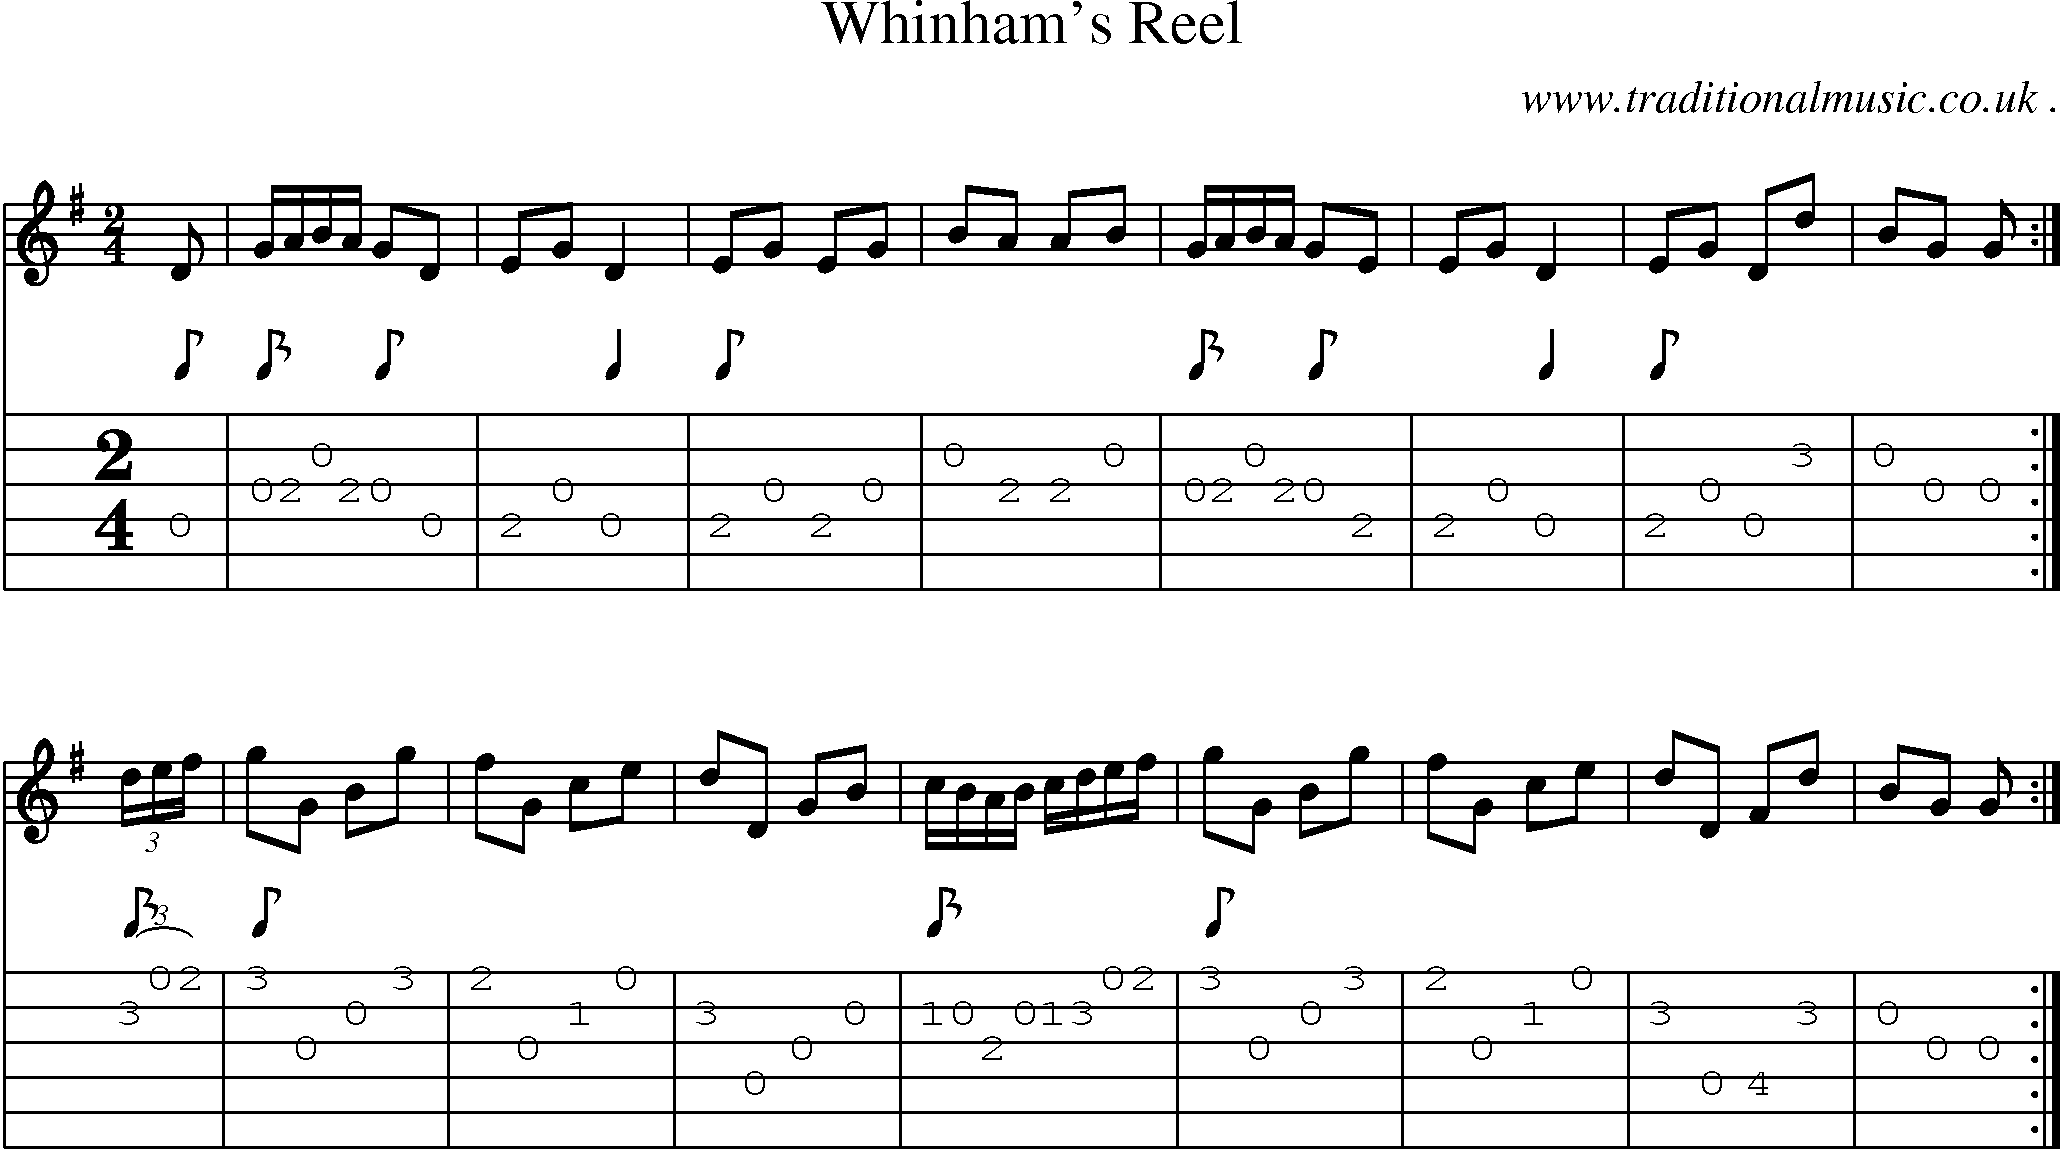 Sheet-music  score, Chords and Guitar Tabs for Whinhams Reel